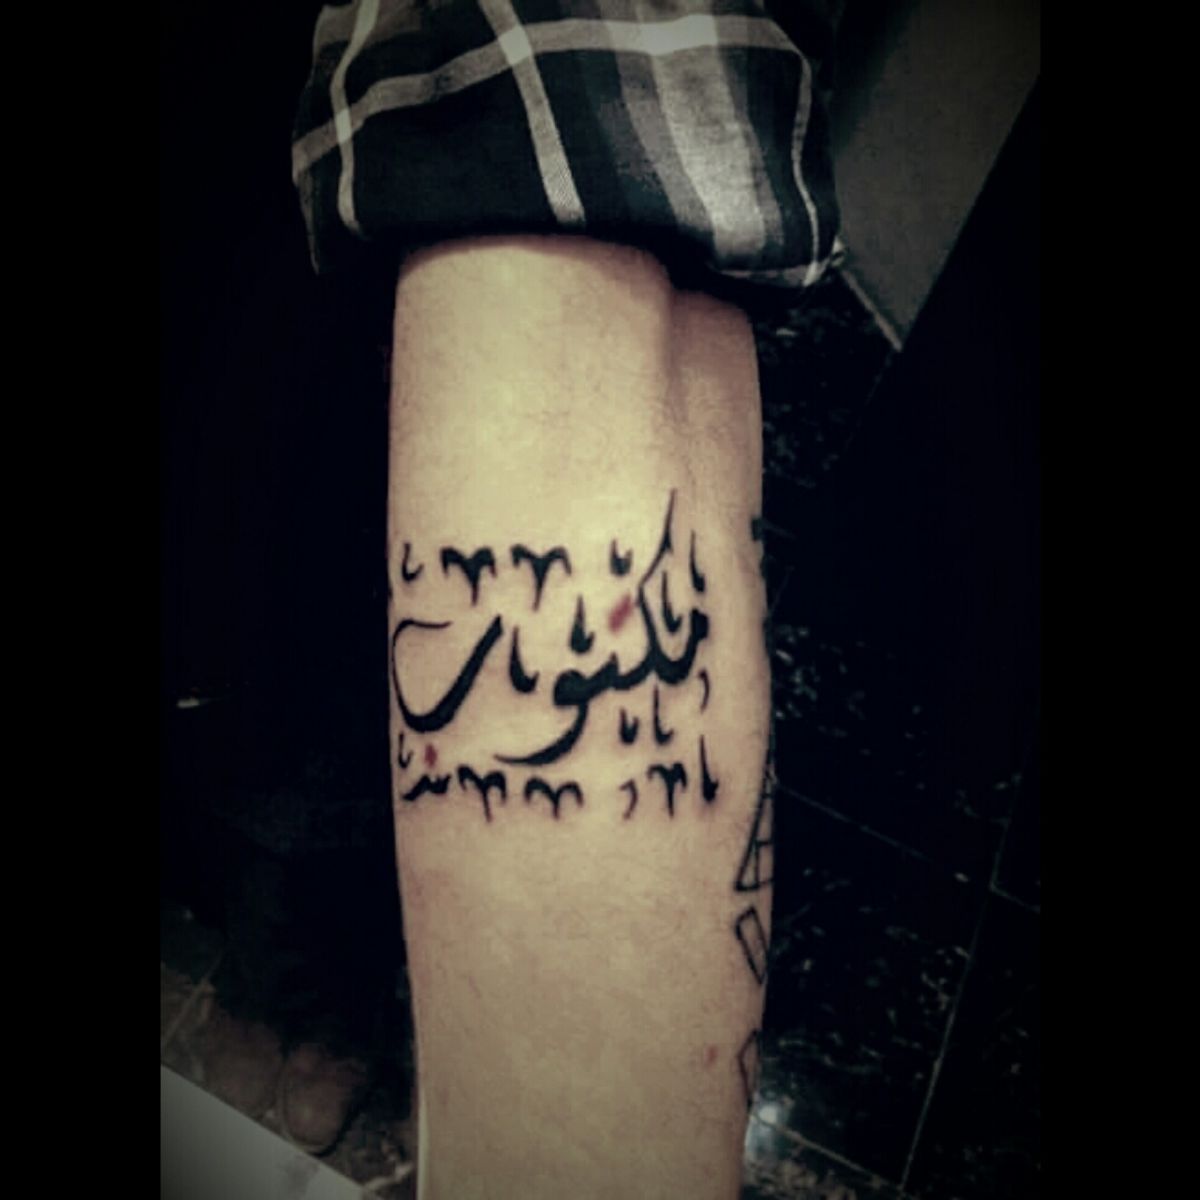 Tattoo uploaded by Mohammad Youssef Hussein • #arabic #calligraphy # ...